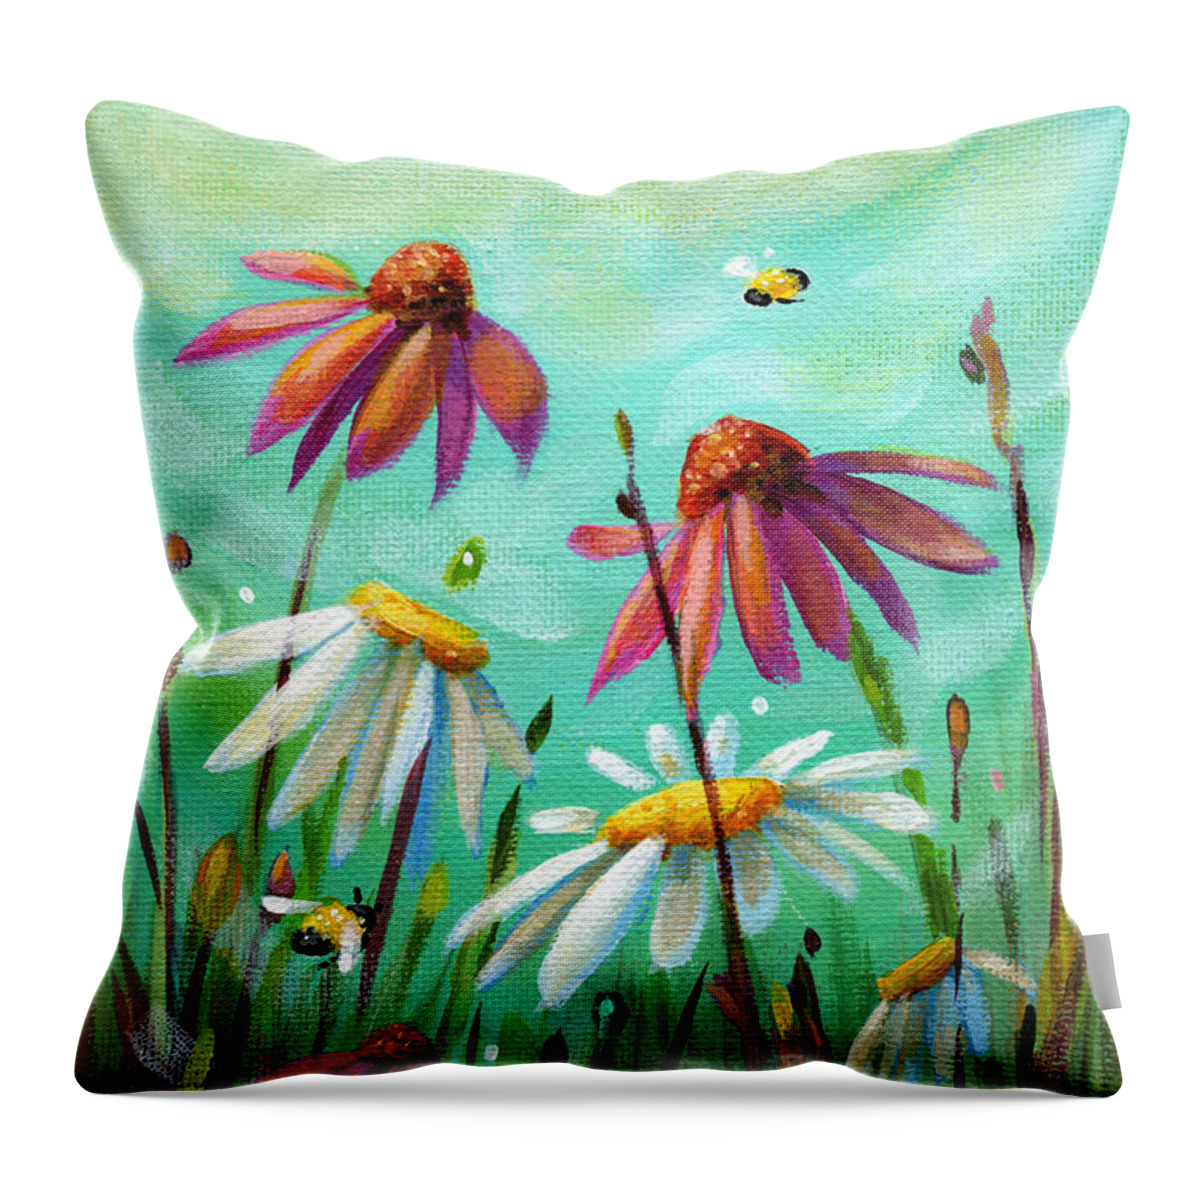 Flowers Throw Pillow featuring the painting Playground Friends - Cone Flowers and Daisies by Annie Troe